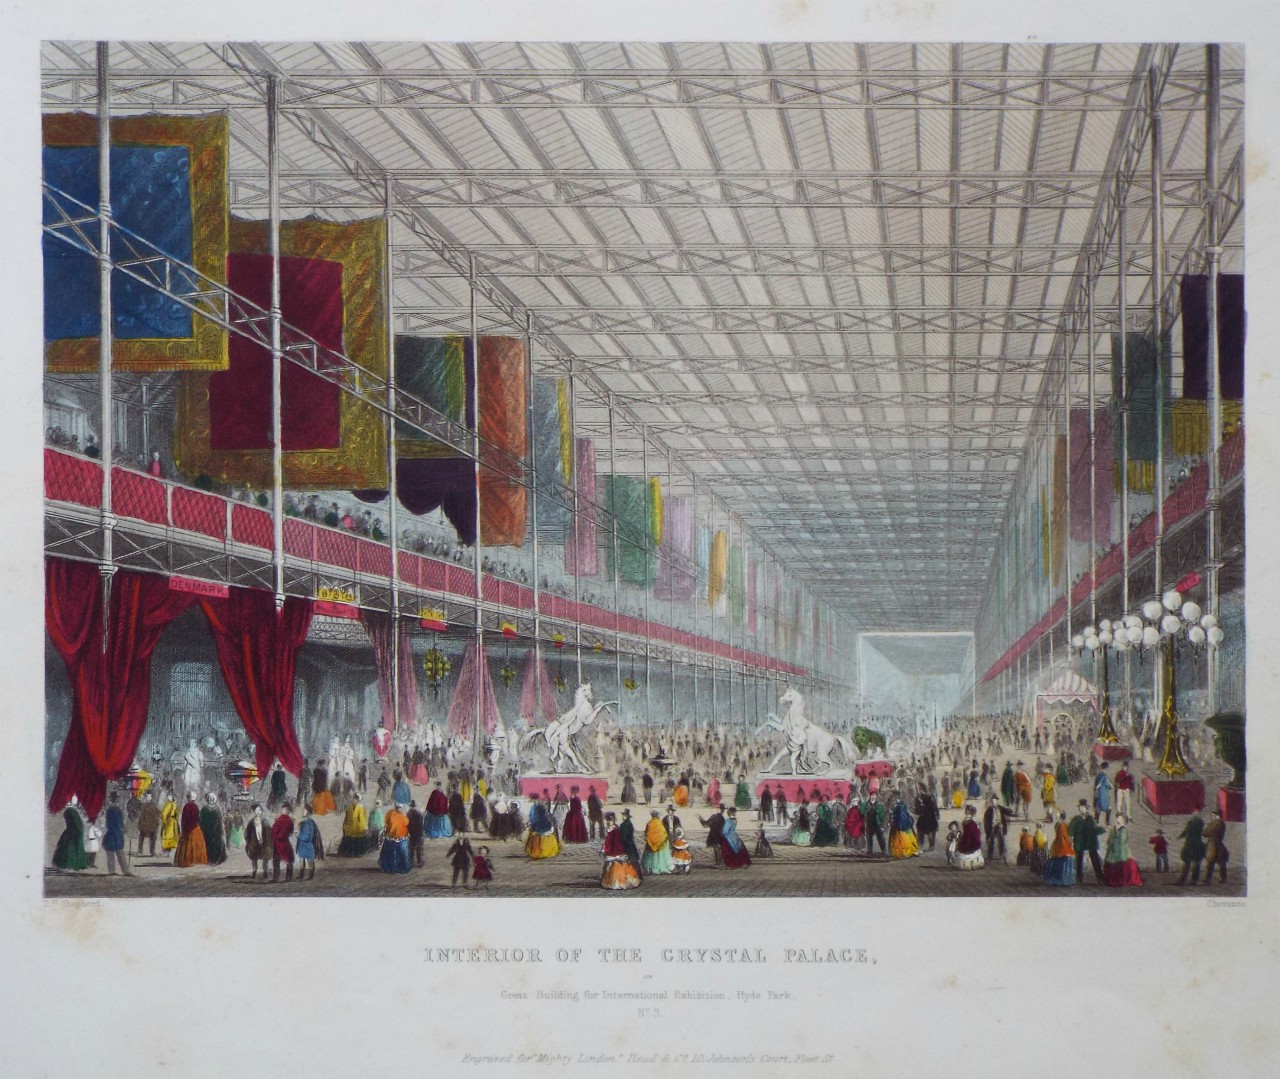 Print - Interior of the Crystal Palace, or Great Building for International Exhibition, Hyde Park. No.3. - 